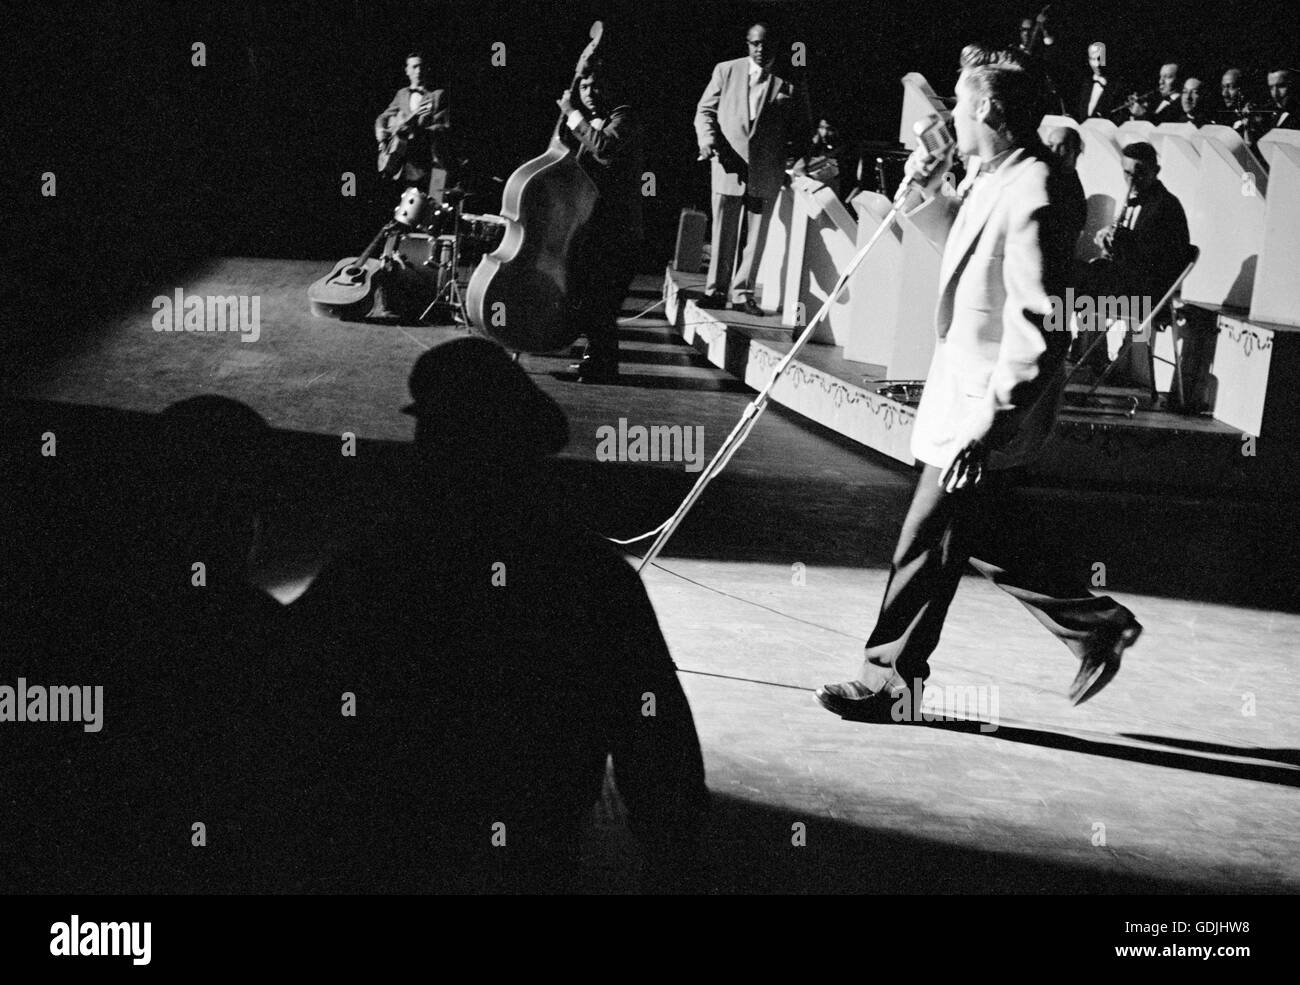 Elvis Presley in concert at the Fox Theater, Detroit, Michigan, May 25, 1956. Also visible on stage are Scotty Moore and Bill Black. Stock Photo